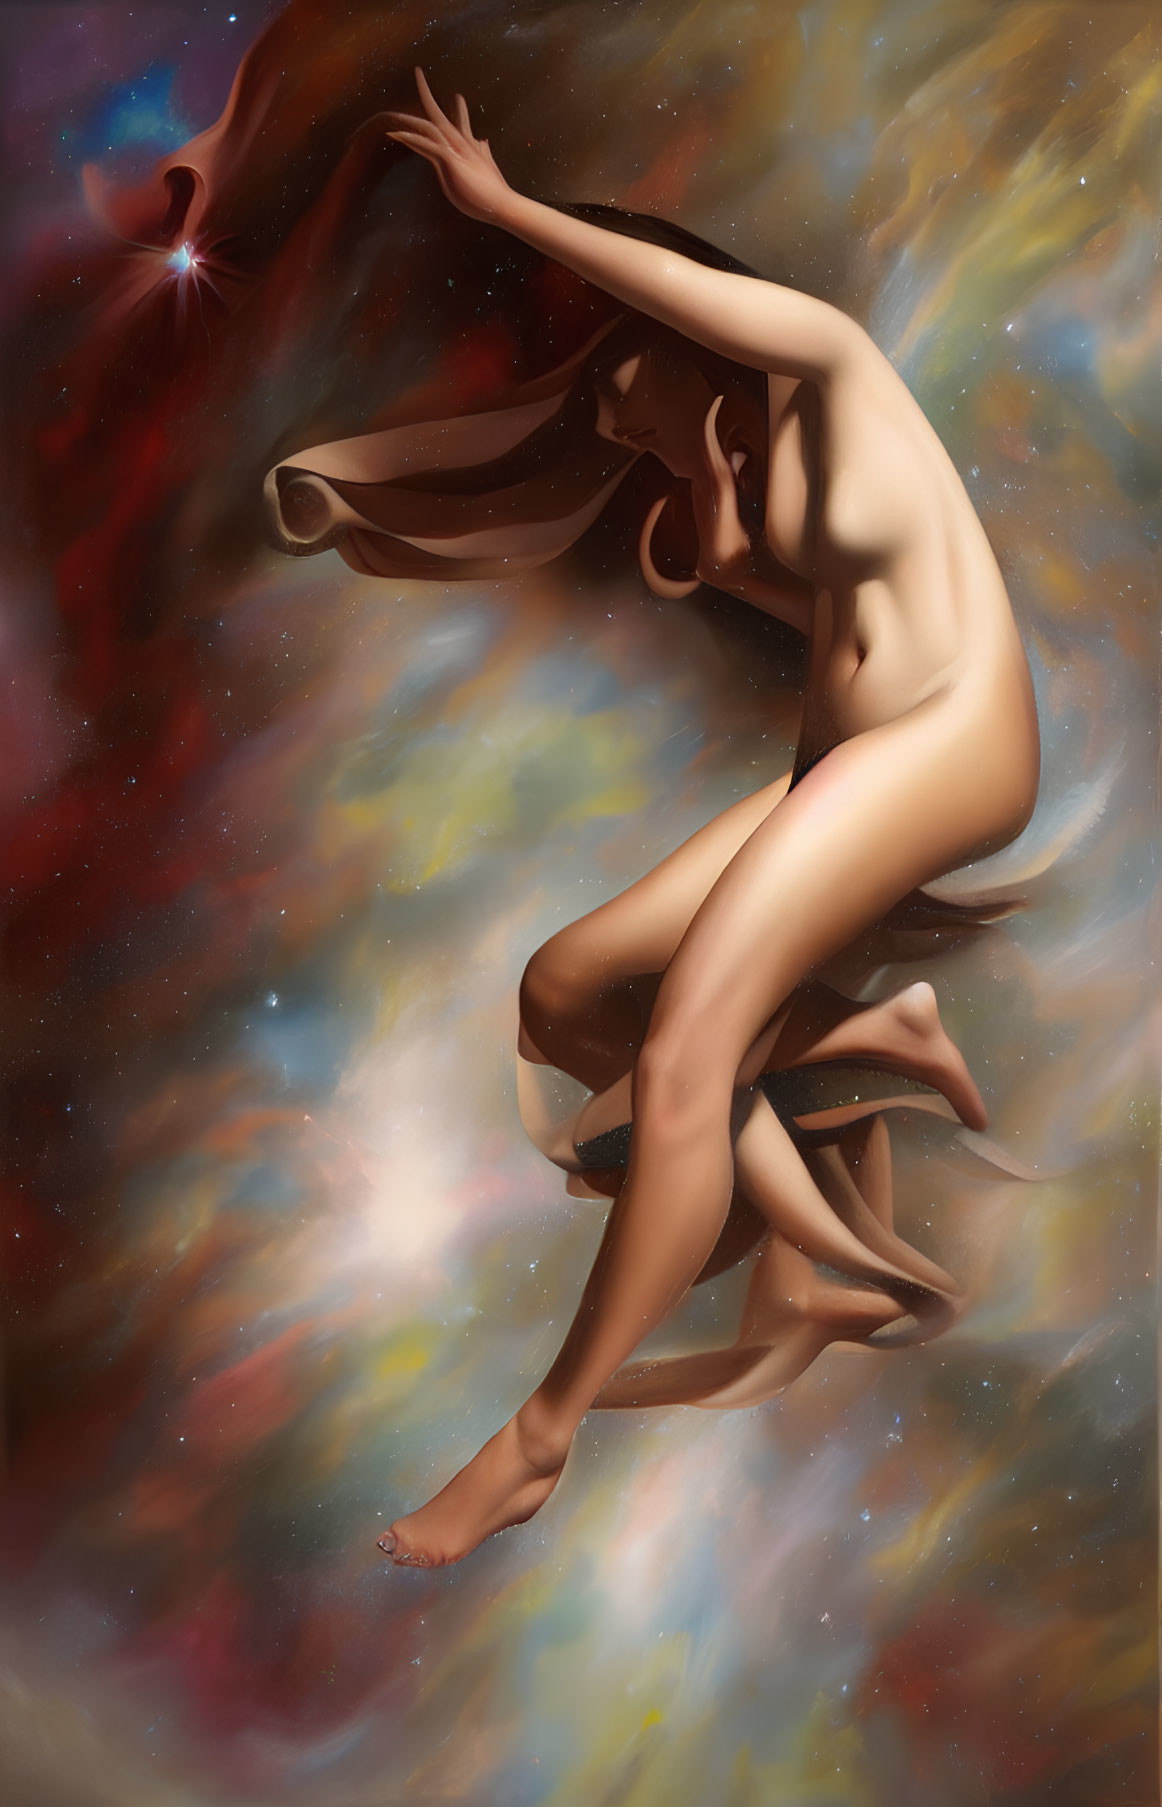 Nude figure floating in vibrant cosmic clouds